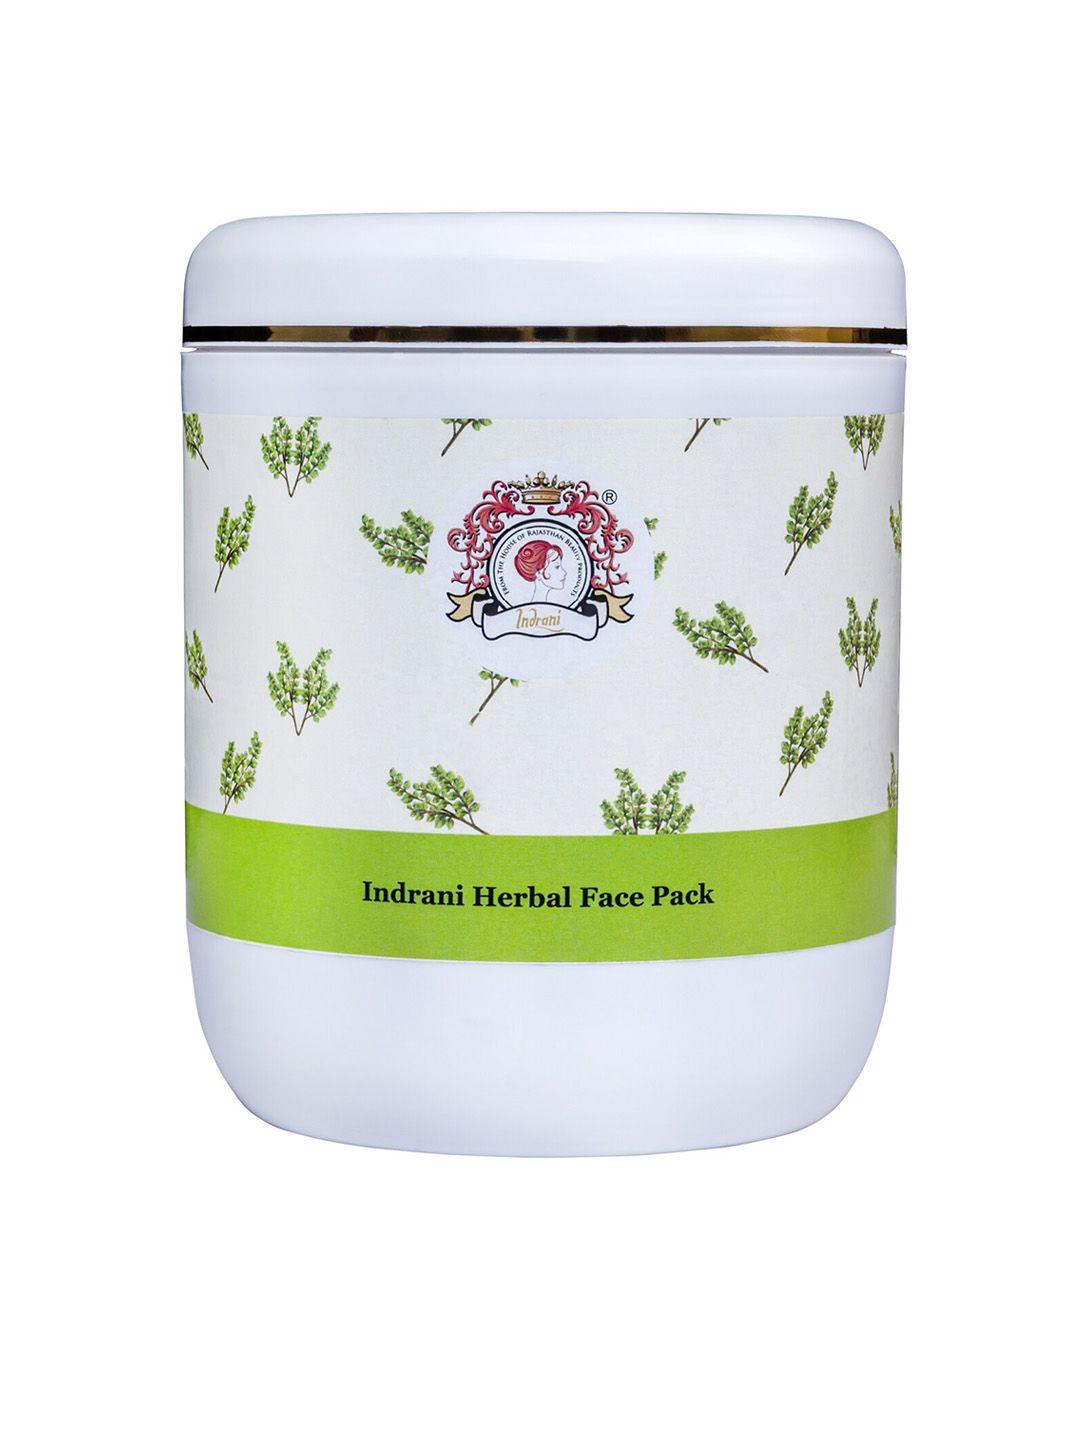 indrani cosmetics herbal face pack - 1 kg